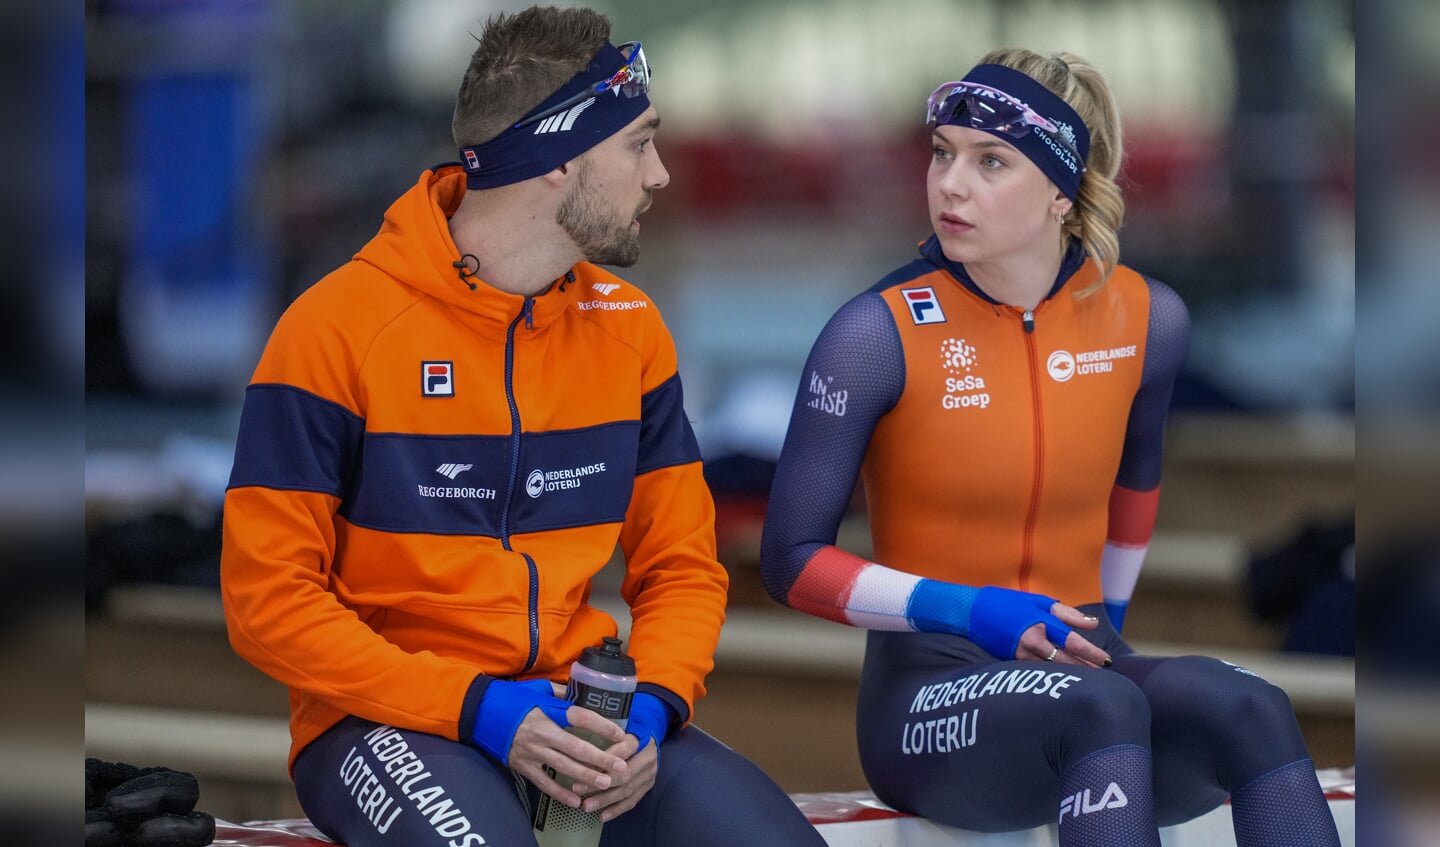 INZELL, GERMANY - MARCH 8: Kjeld Nuis, Joy Beune of The Netherlands during a Training before the ISU World Speed Skating Allround & Sprint Championships at Max Aicher Arena on March 8, 2024 in Inzell, Germany. (Photo by Douwe Bijlsma/Orange Pictures)